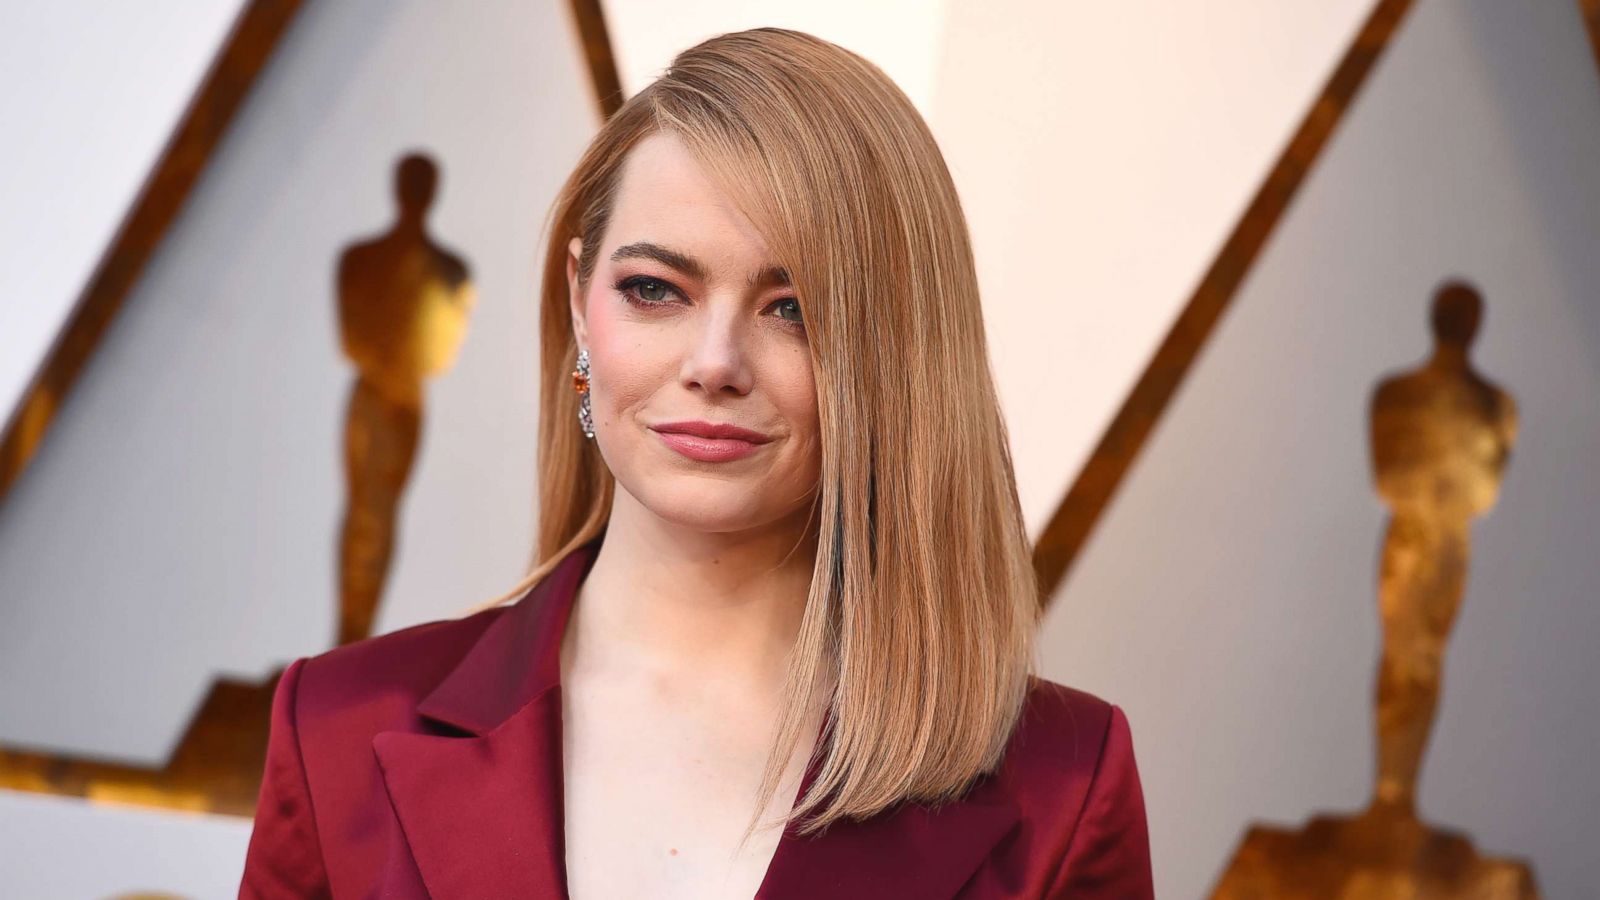 EXCLUSIVE: Emma Stone speaks about sensuality and starring in the